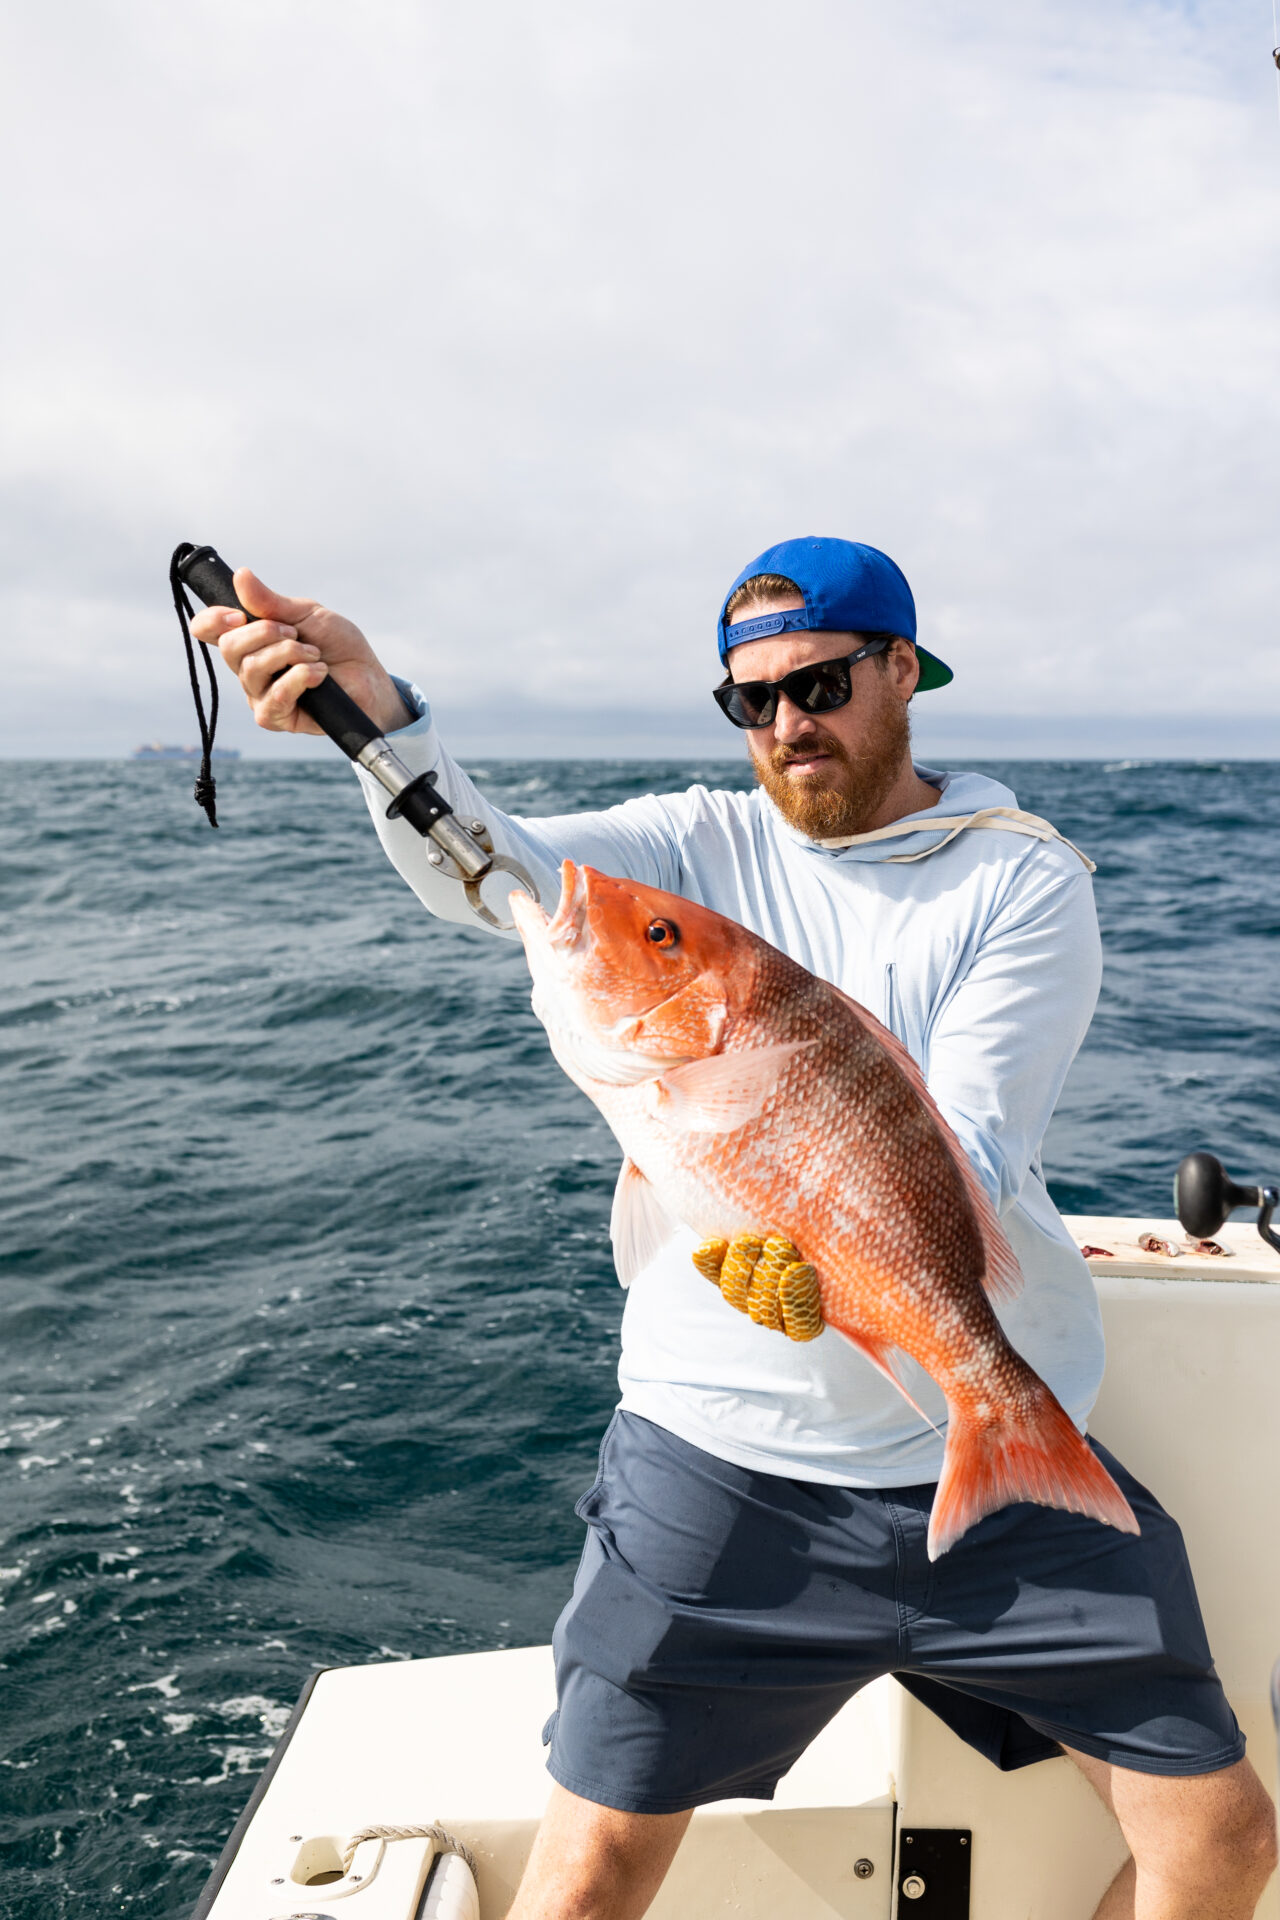 James London of Chubby Fish with a red snapper caught on a boat